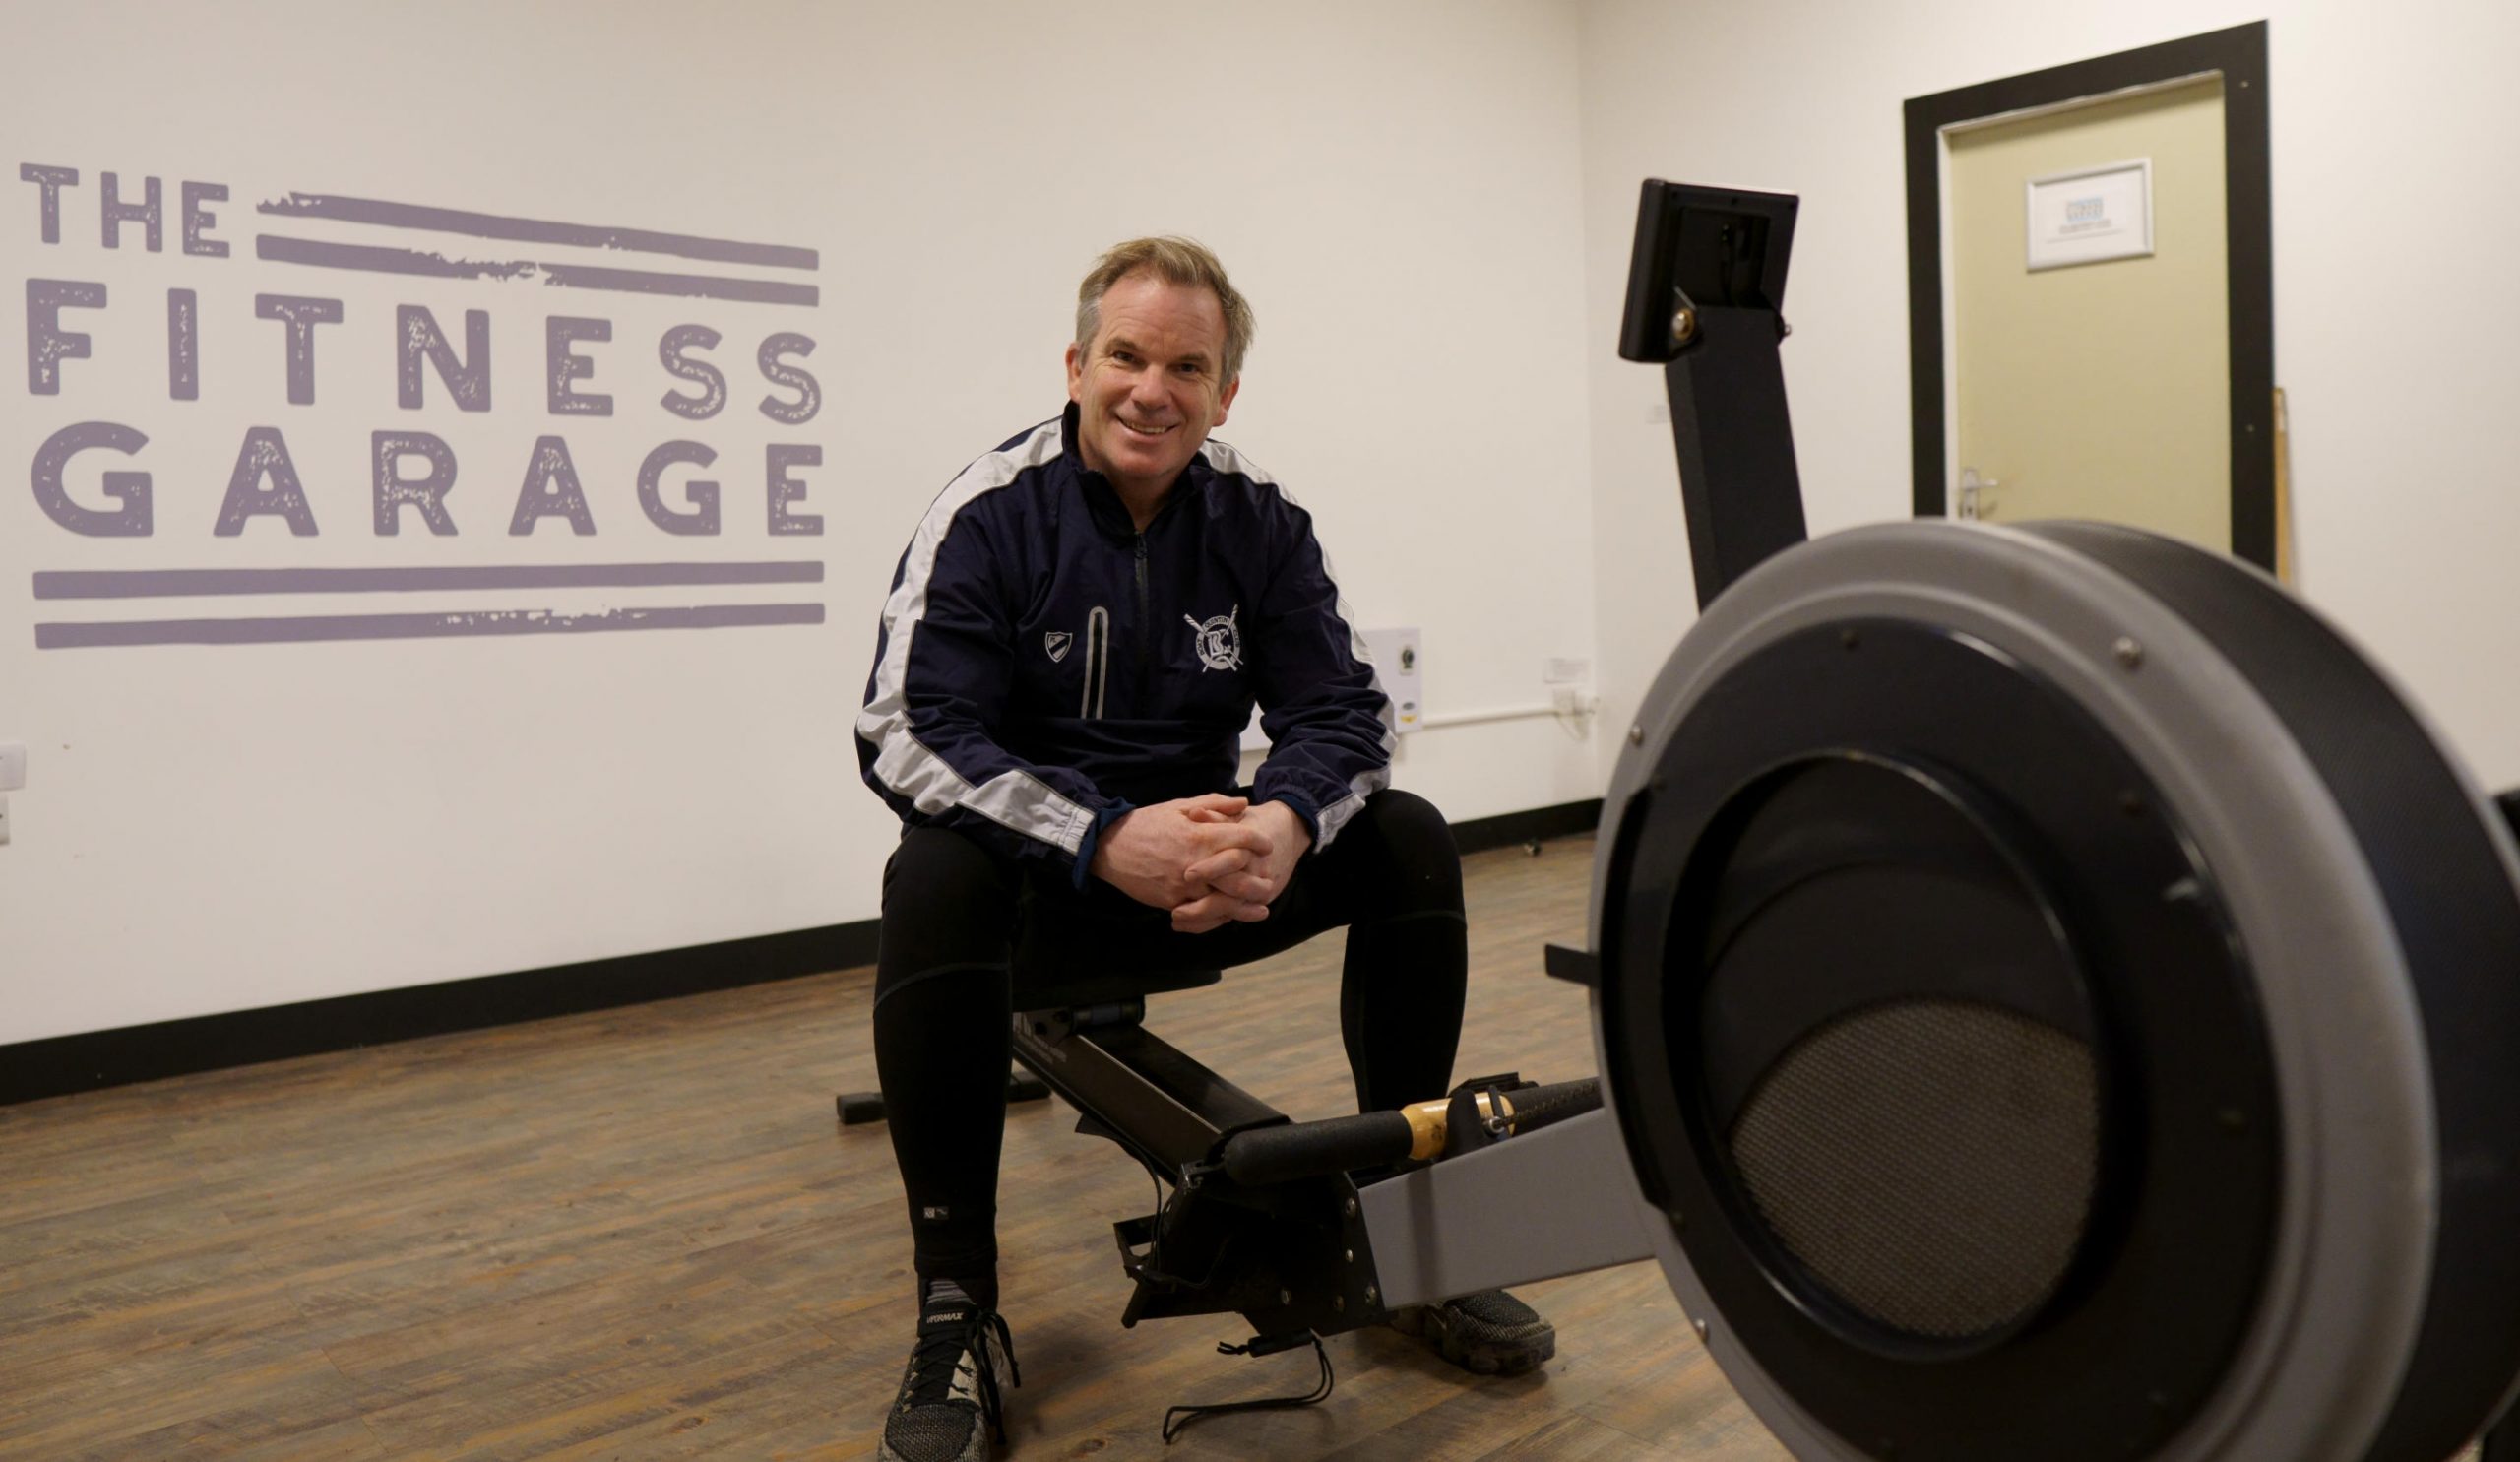 Get Fit to Row - a rowing club in Harrogate